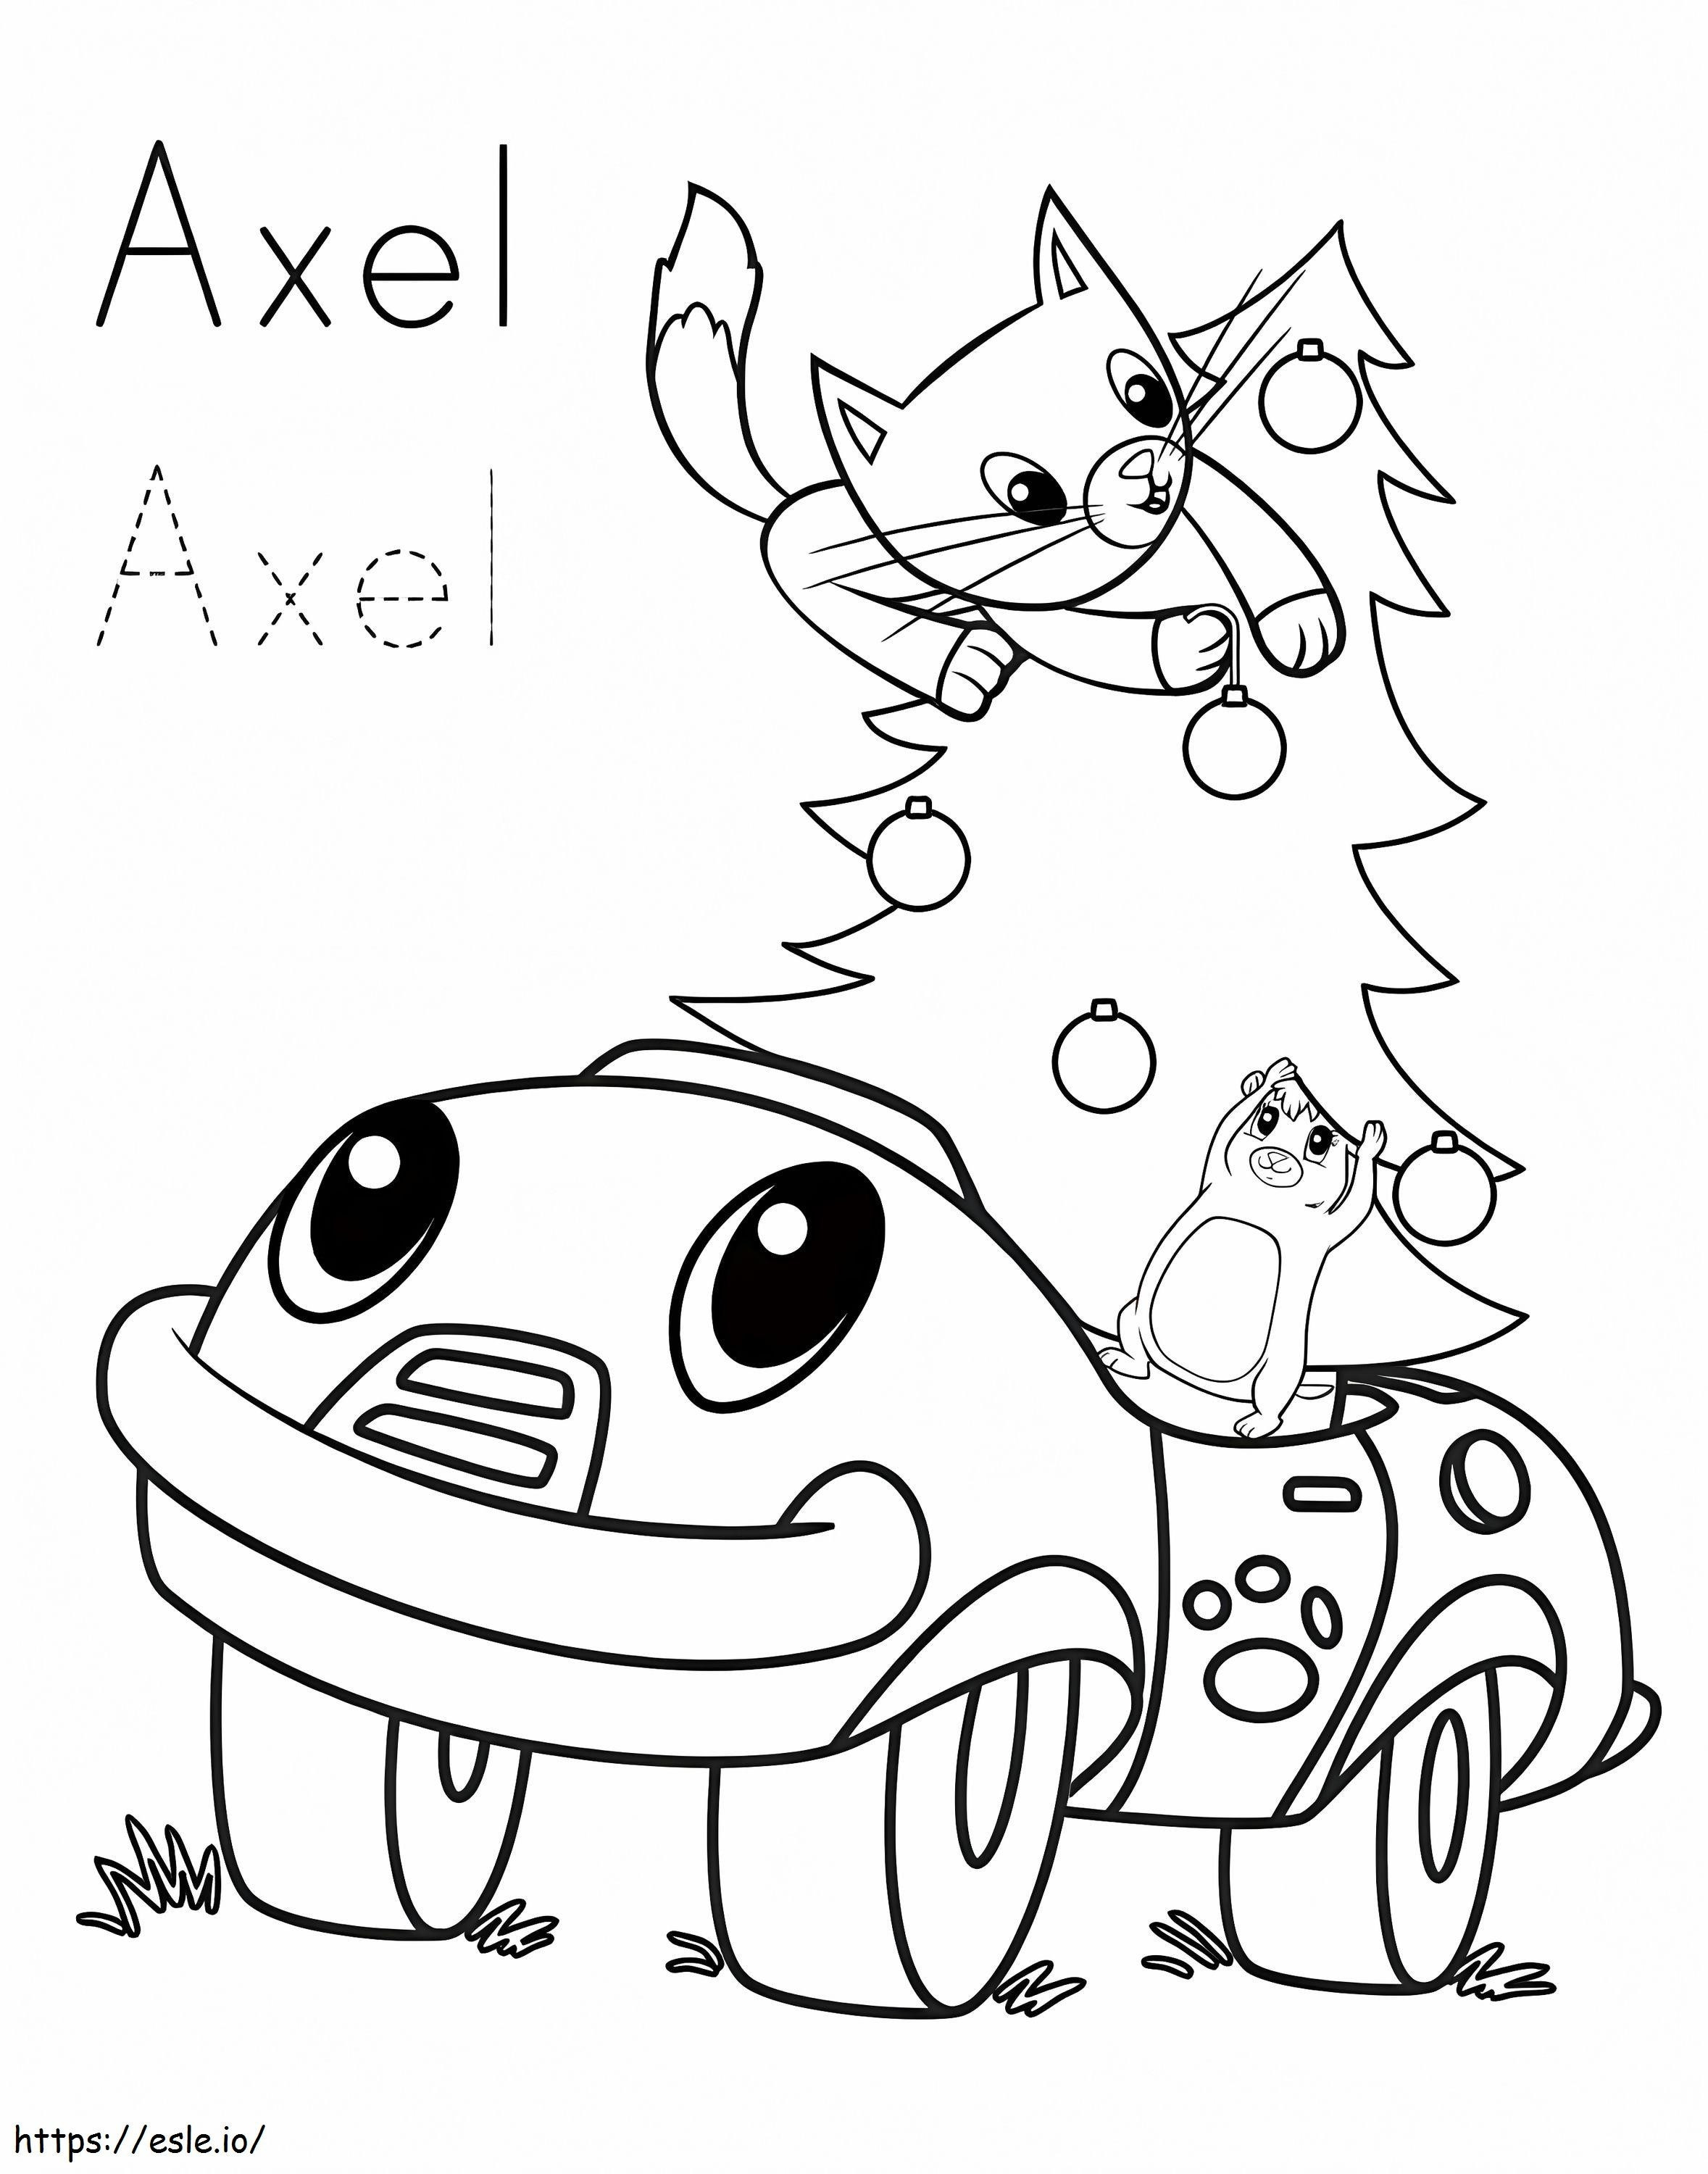 Axel From Leapfrog coloring page